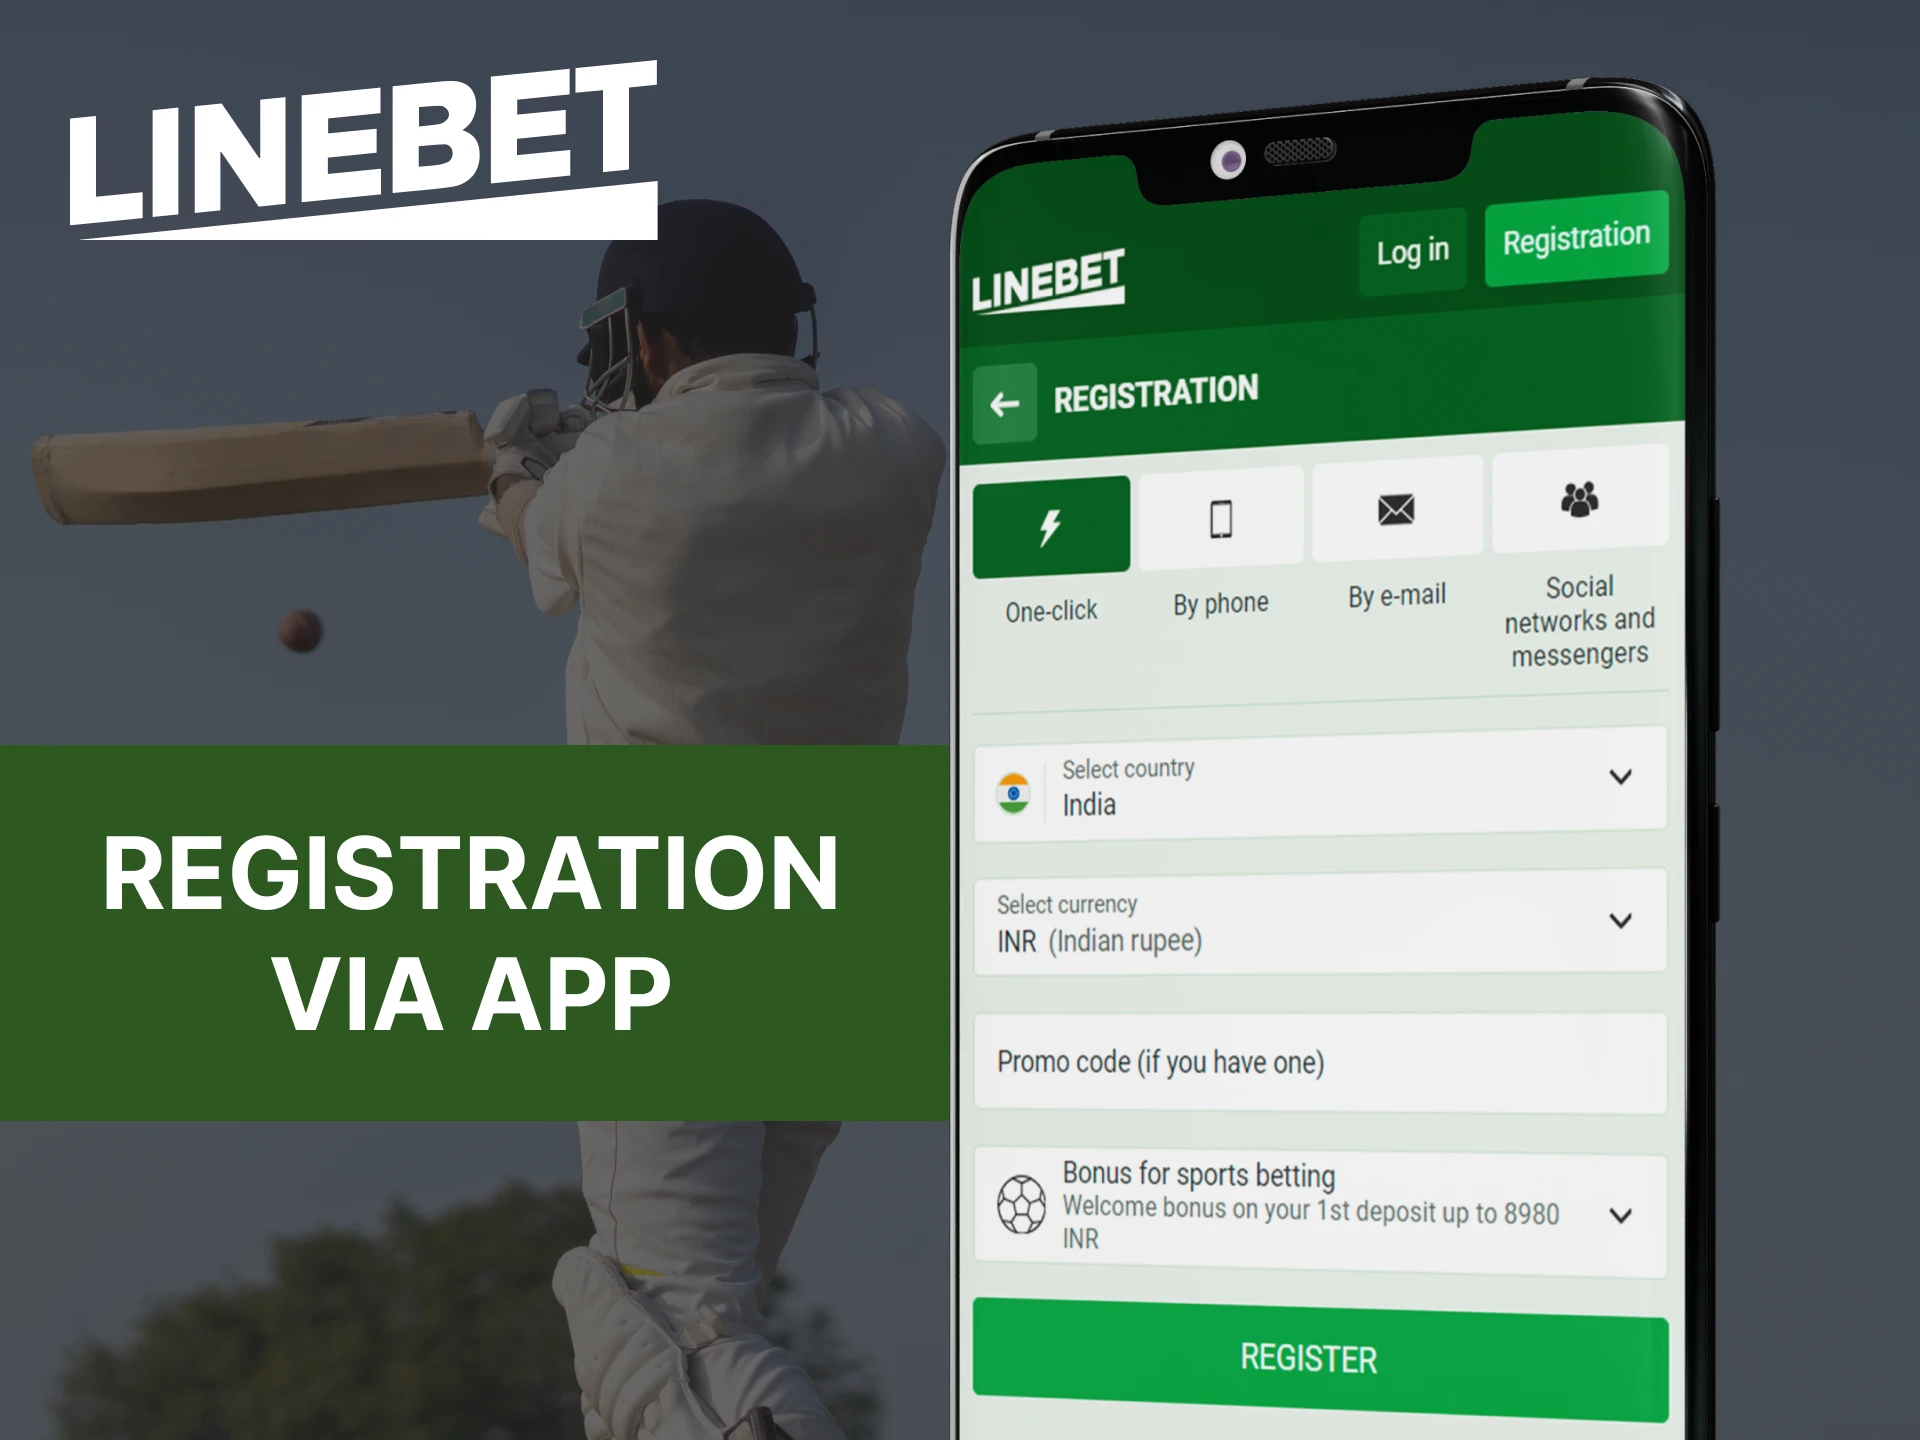 Register for the Linebet mobile app quickly and easily.